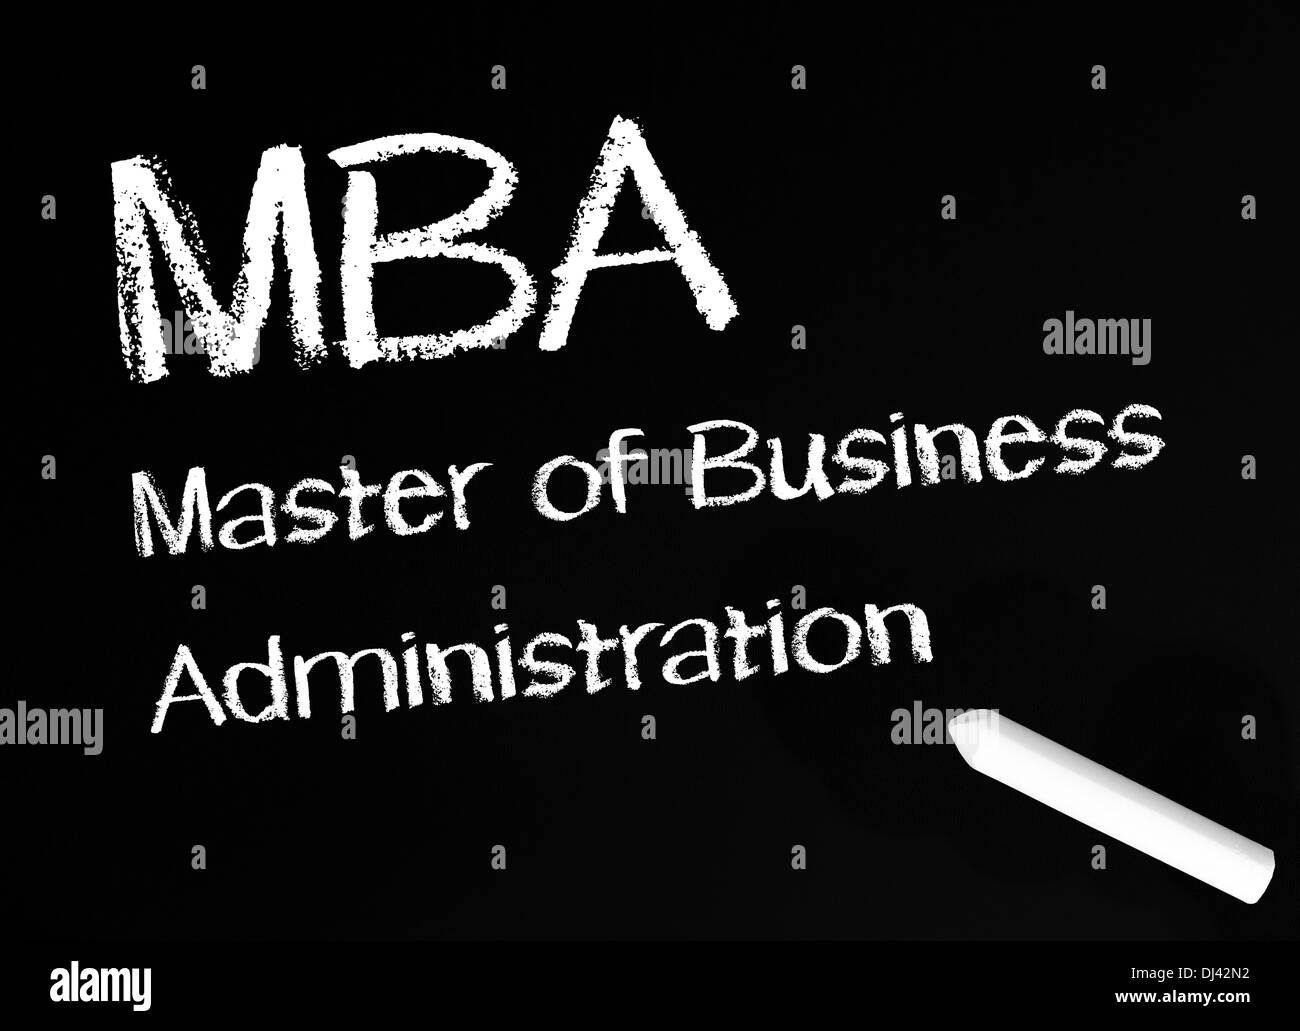 Mba Master Of Business Administration DJ42N2 